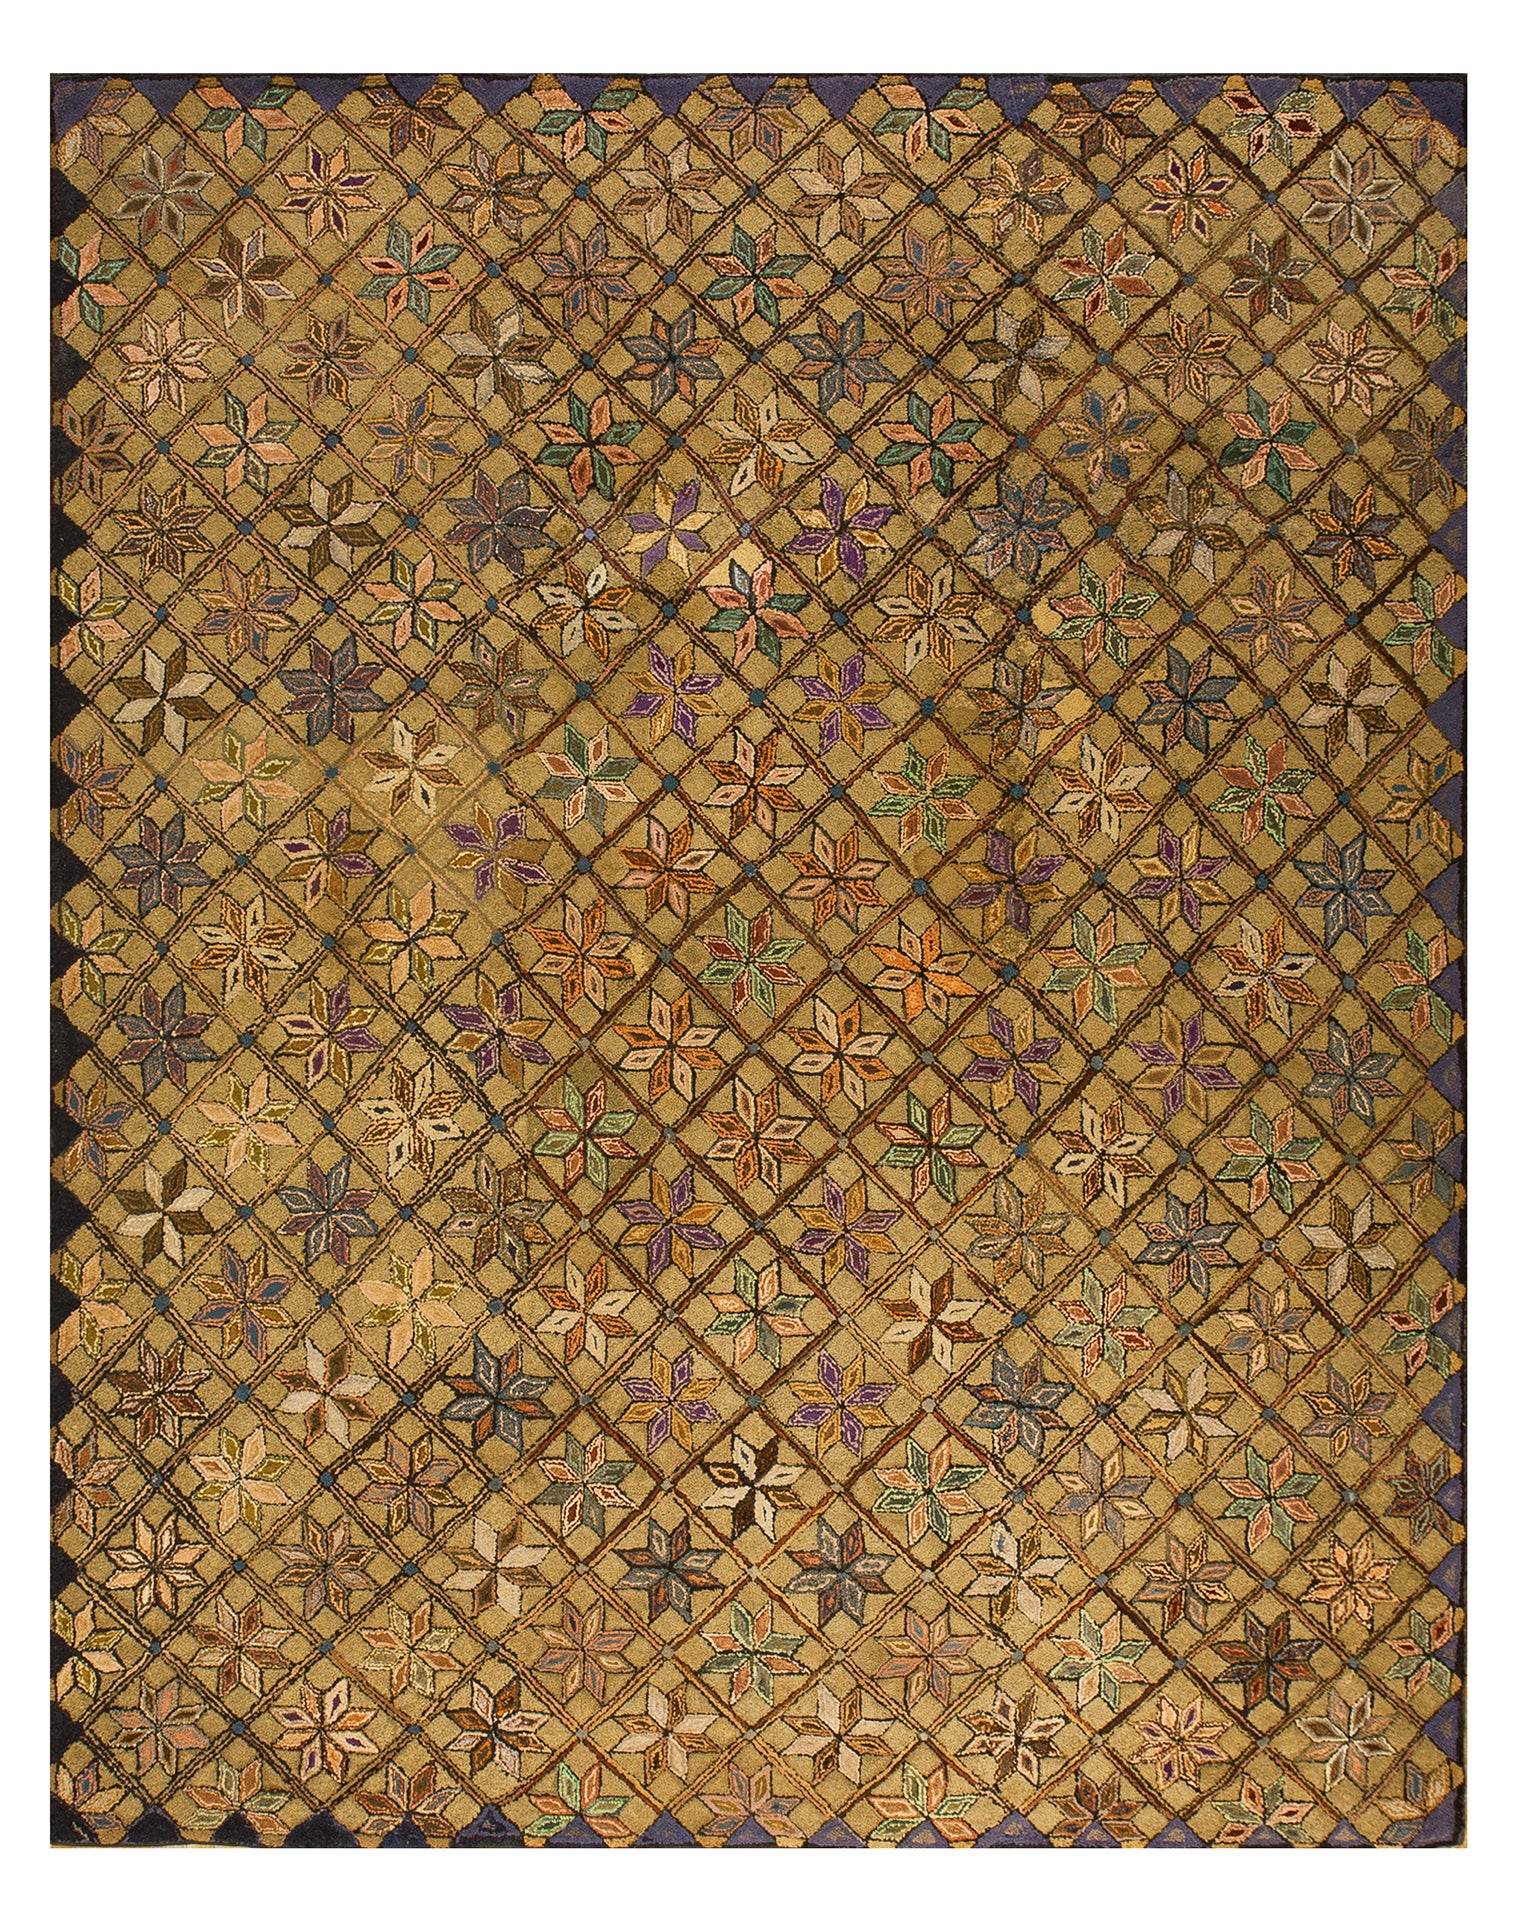 Early 20th Century American Hooked Rug ( 10' x 12'2" - 305 x 371 ) For Sale